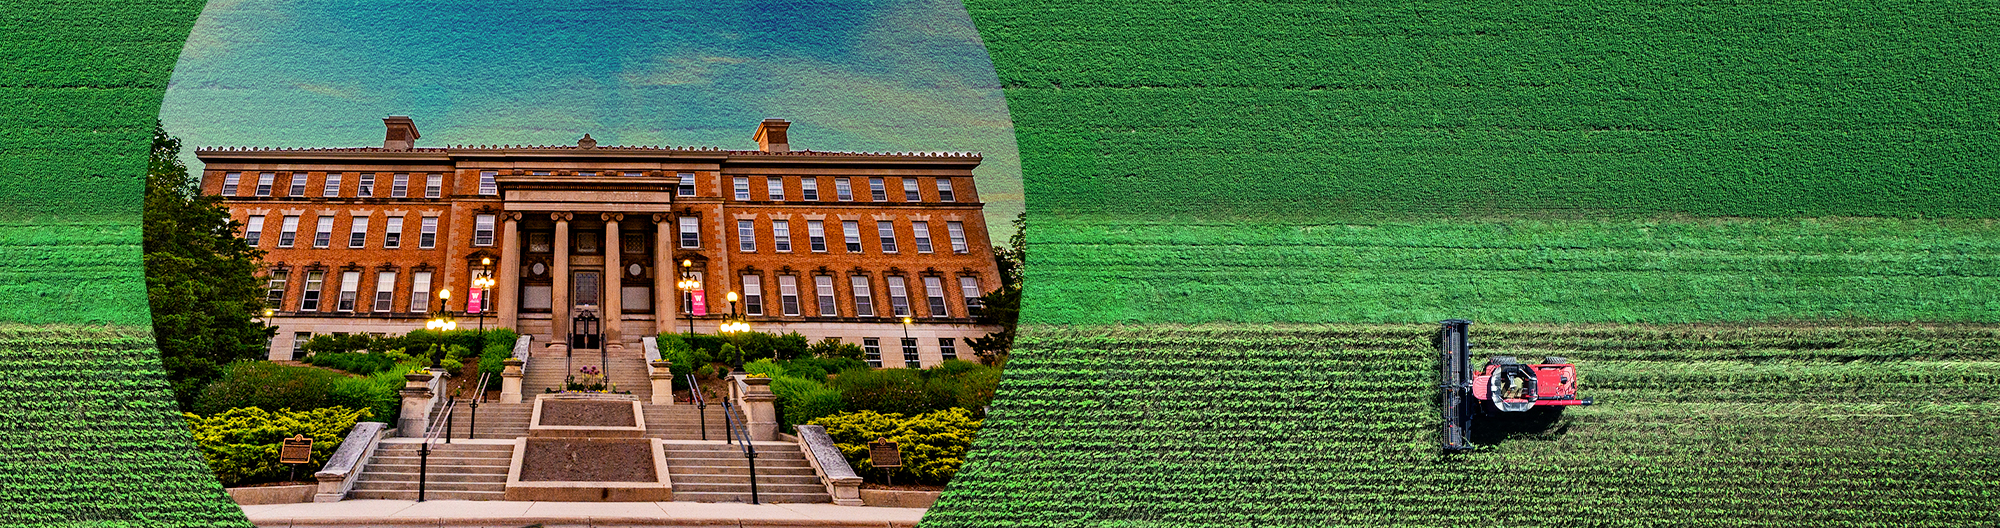 Photo illustration showing tractor working rows of green farm field with inset photo of Agriculture Hall on UW–Madison campus.